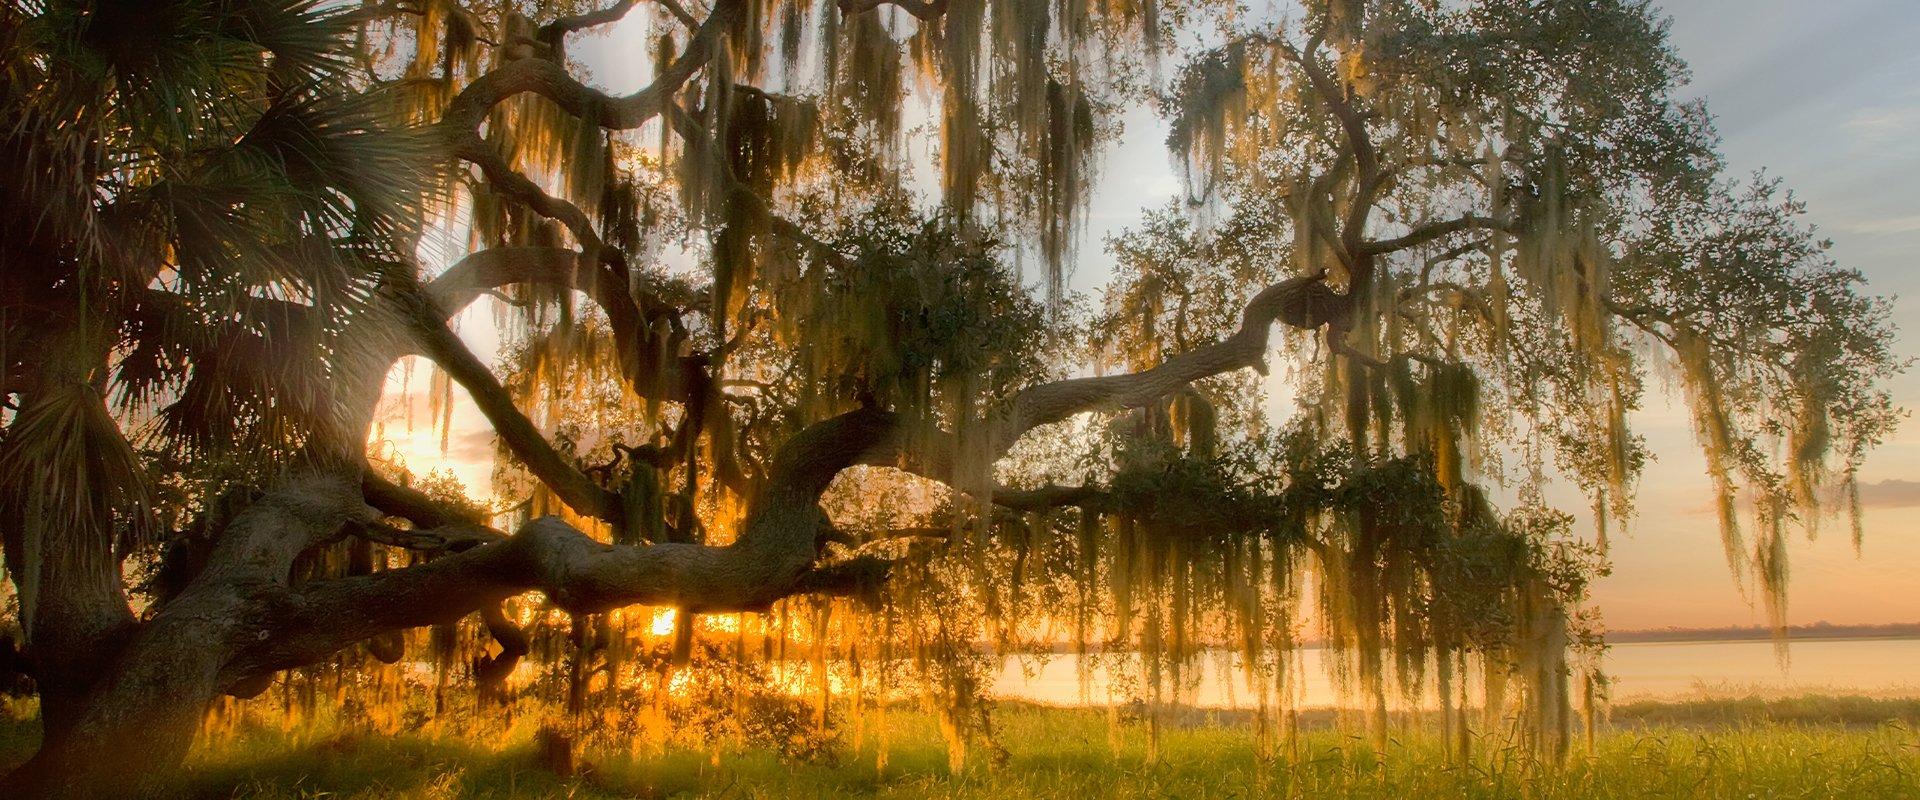 a live oak tree near water with the sun setting on it